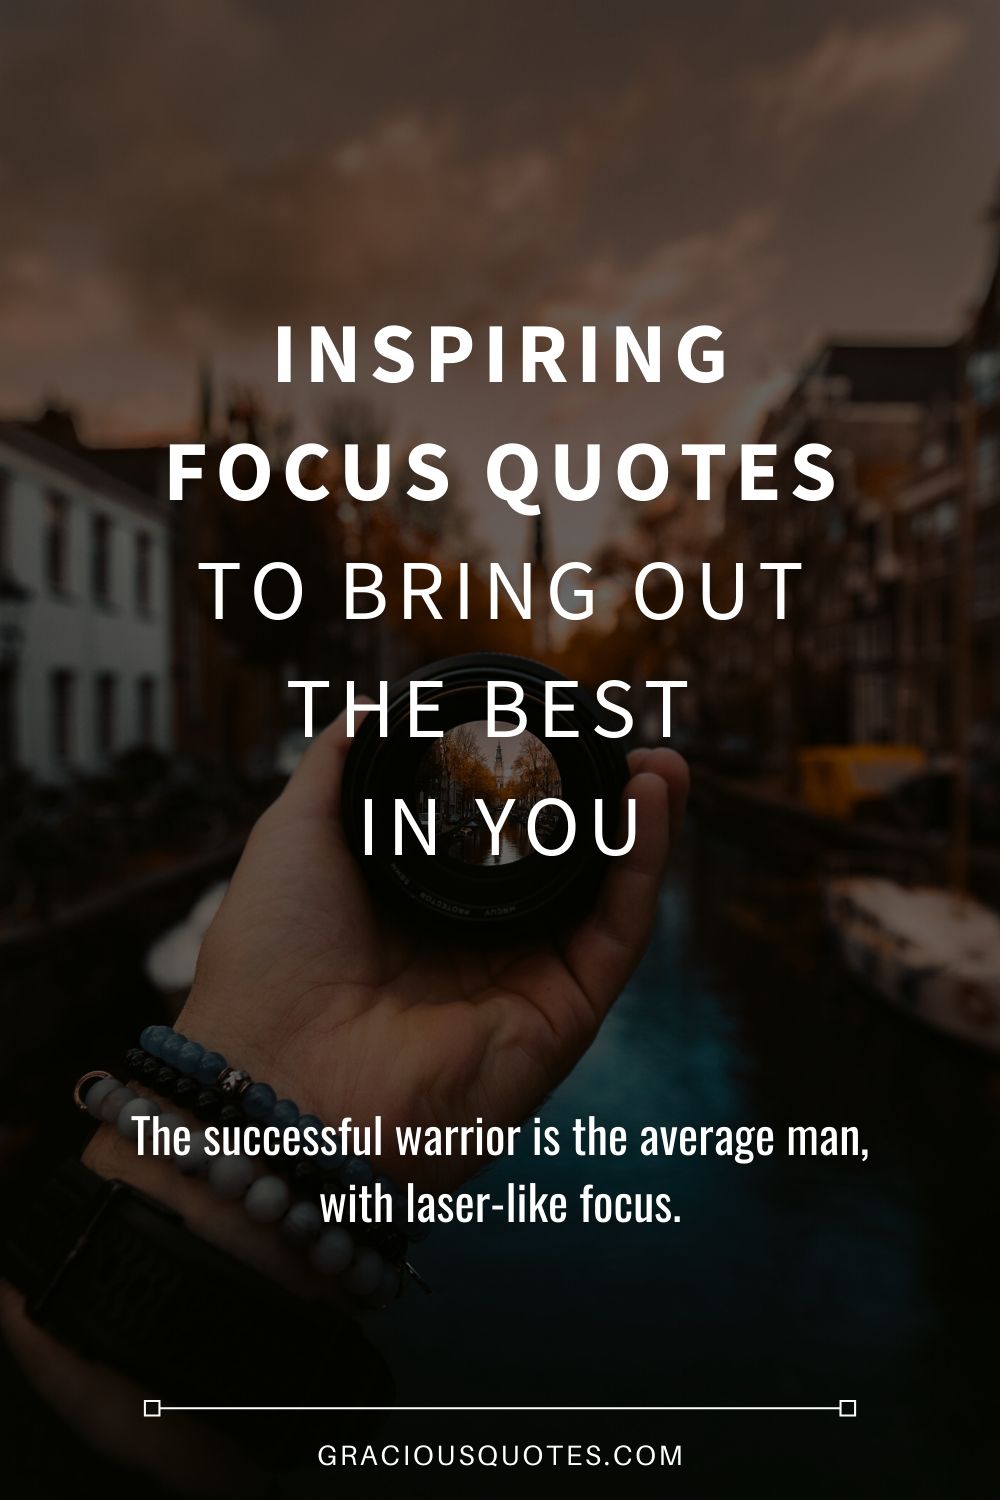 67 You Got This Quotes to Give You a Motivational Boost - Happier